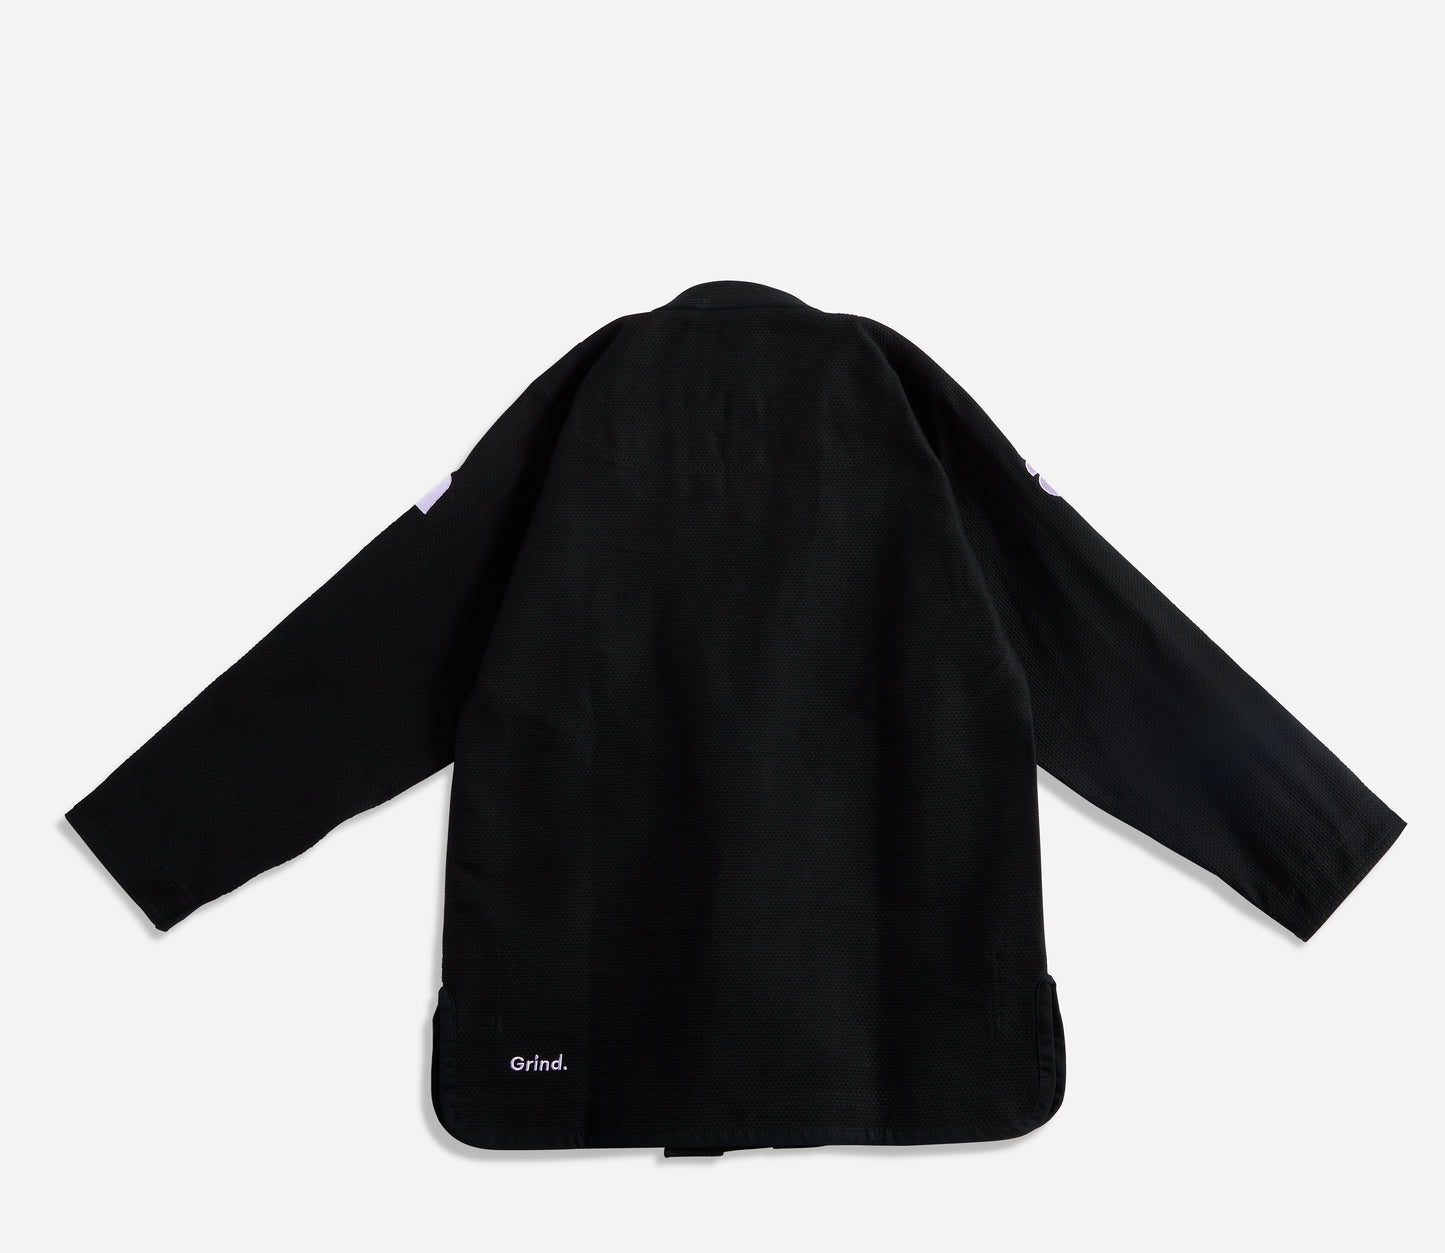 black AbyVHTS "GLARE" Jacket is made with 450 GSM pearl weave Pants is made with 10 oz cotton twill Unique eyes embroidery design on the Jacket   vhts europe